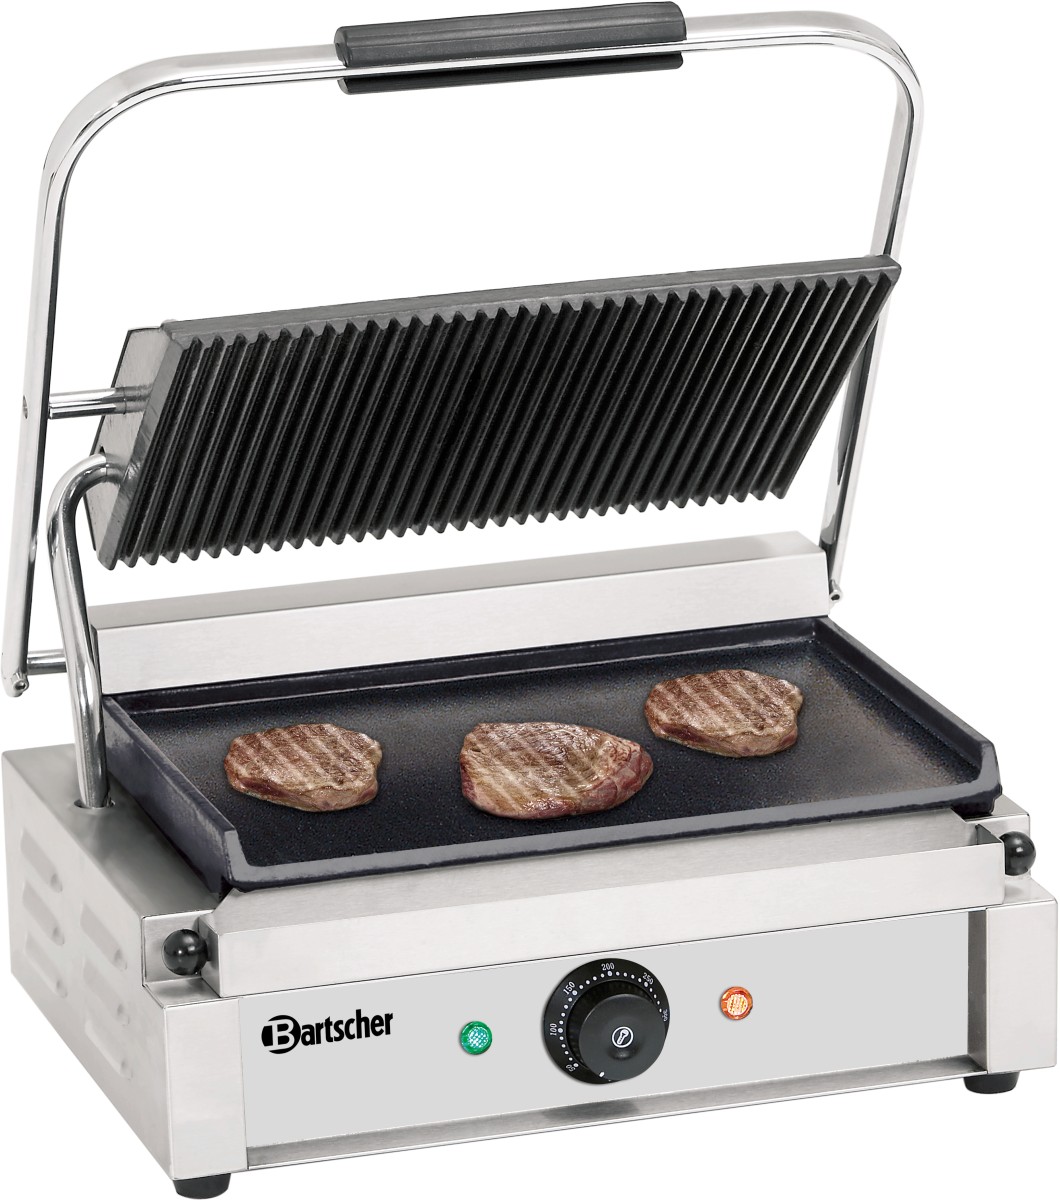  Bartscher Grill contact "Panini" 1GR 